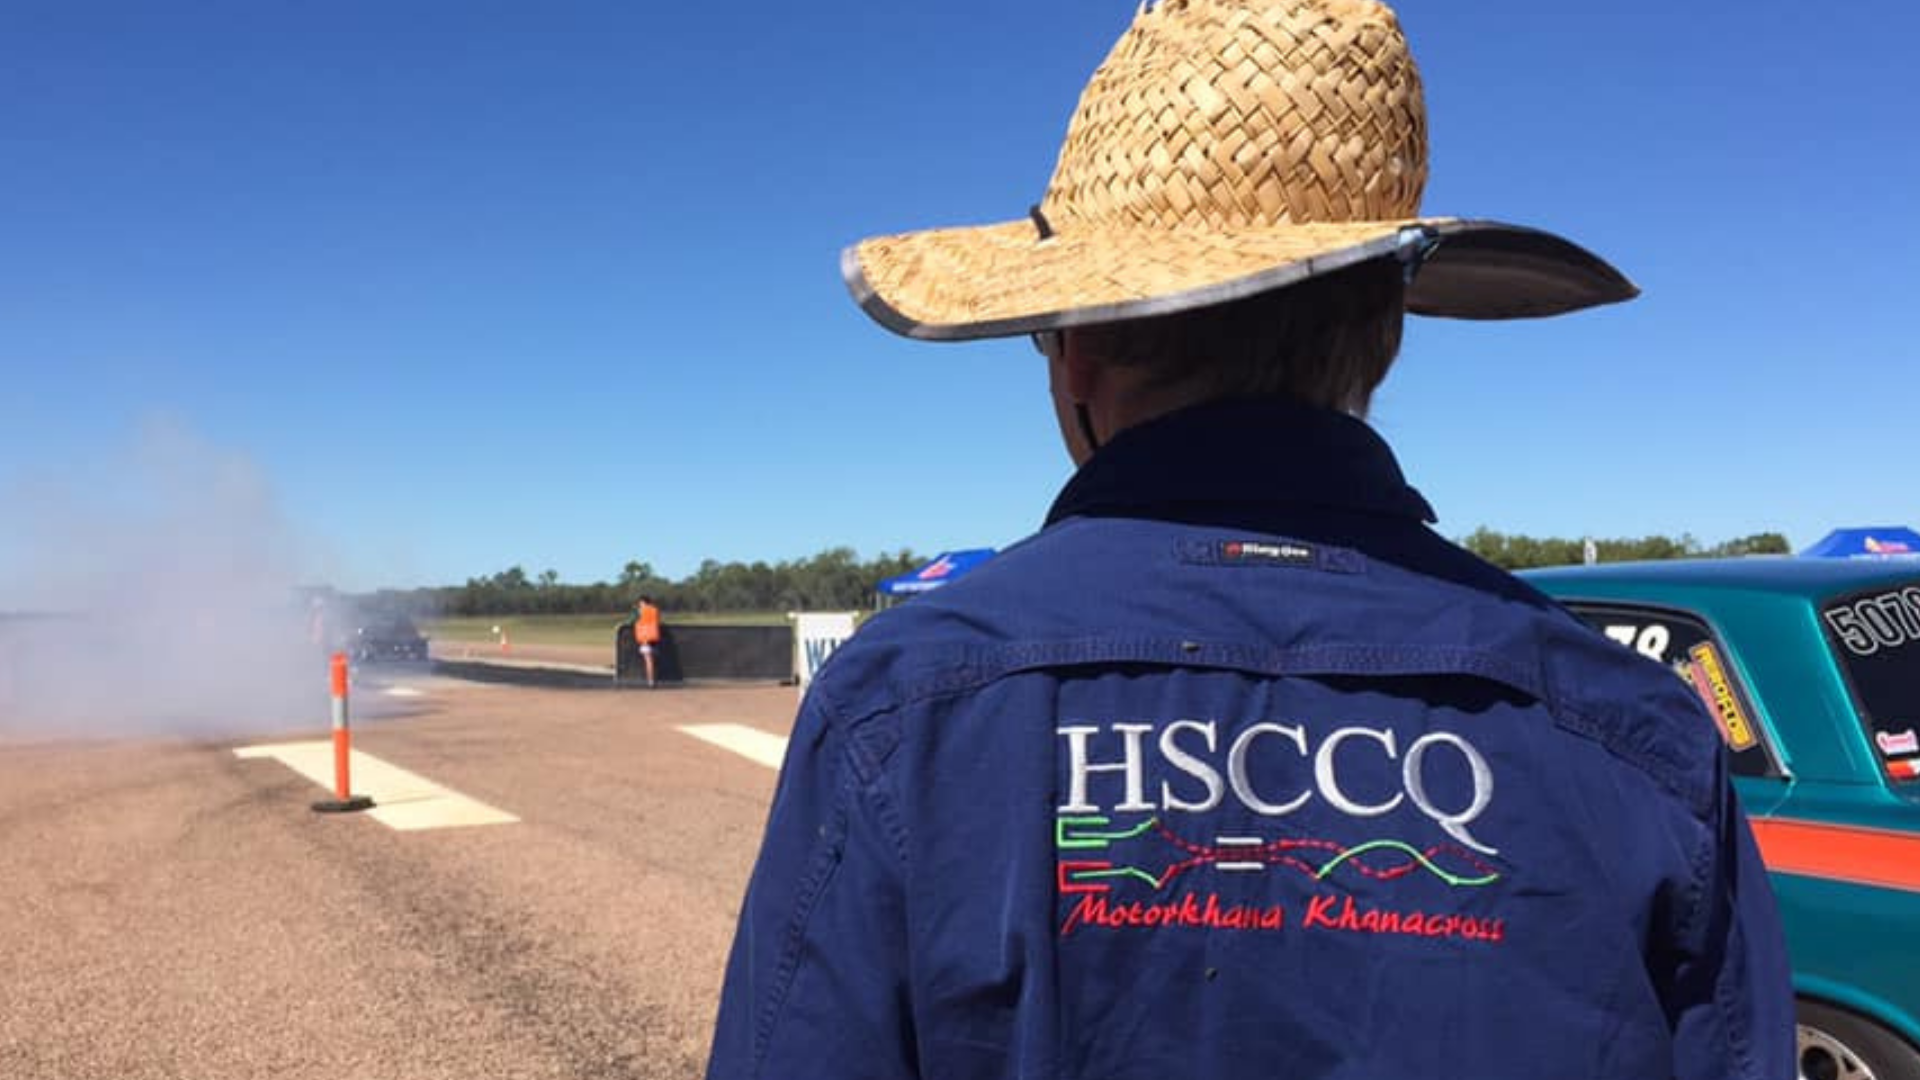 Member wearing an HSCCQ shirt looks at car participating in motorsport event